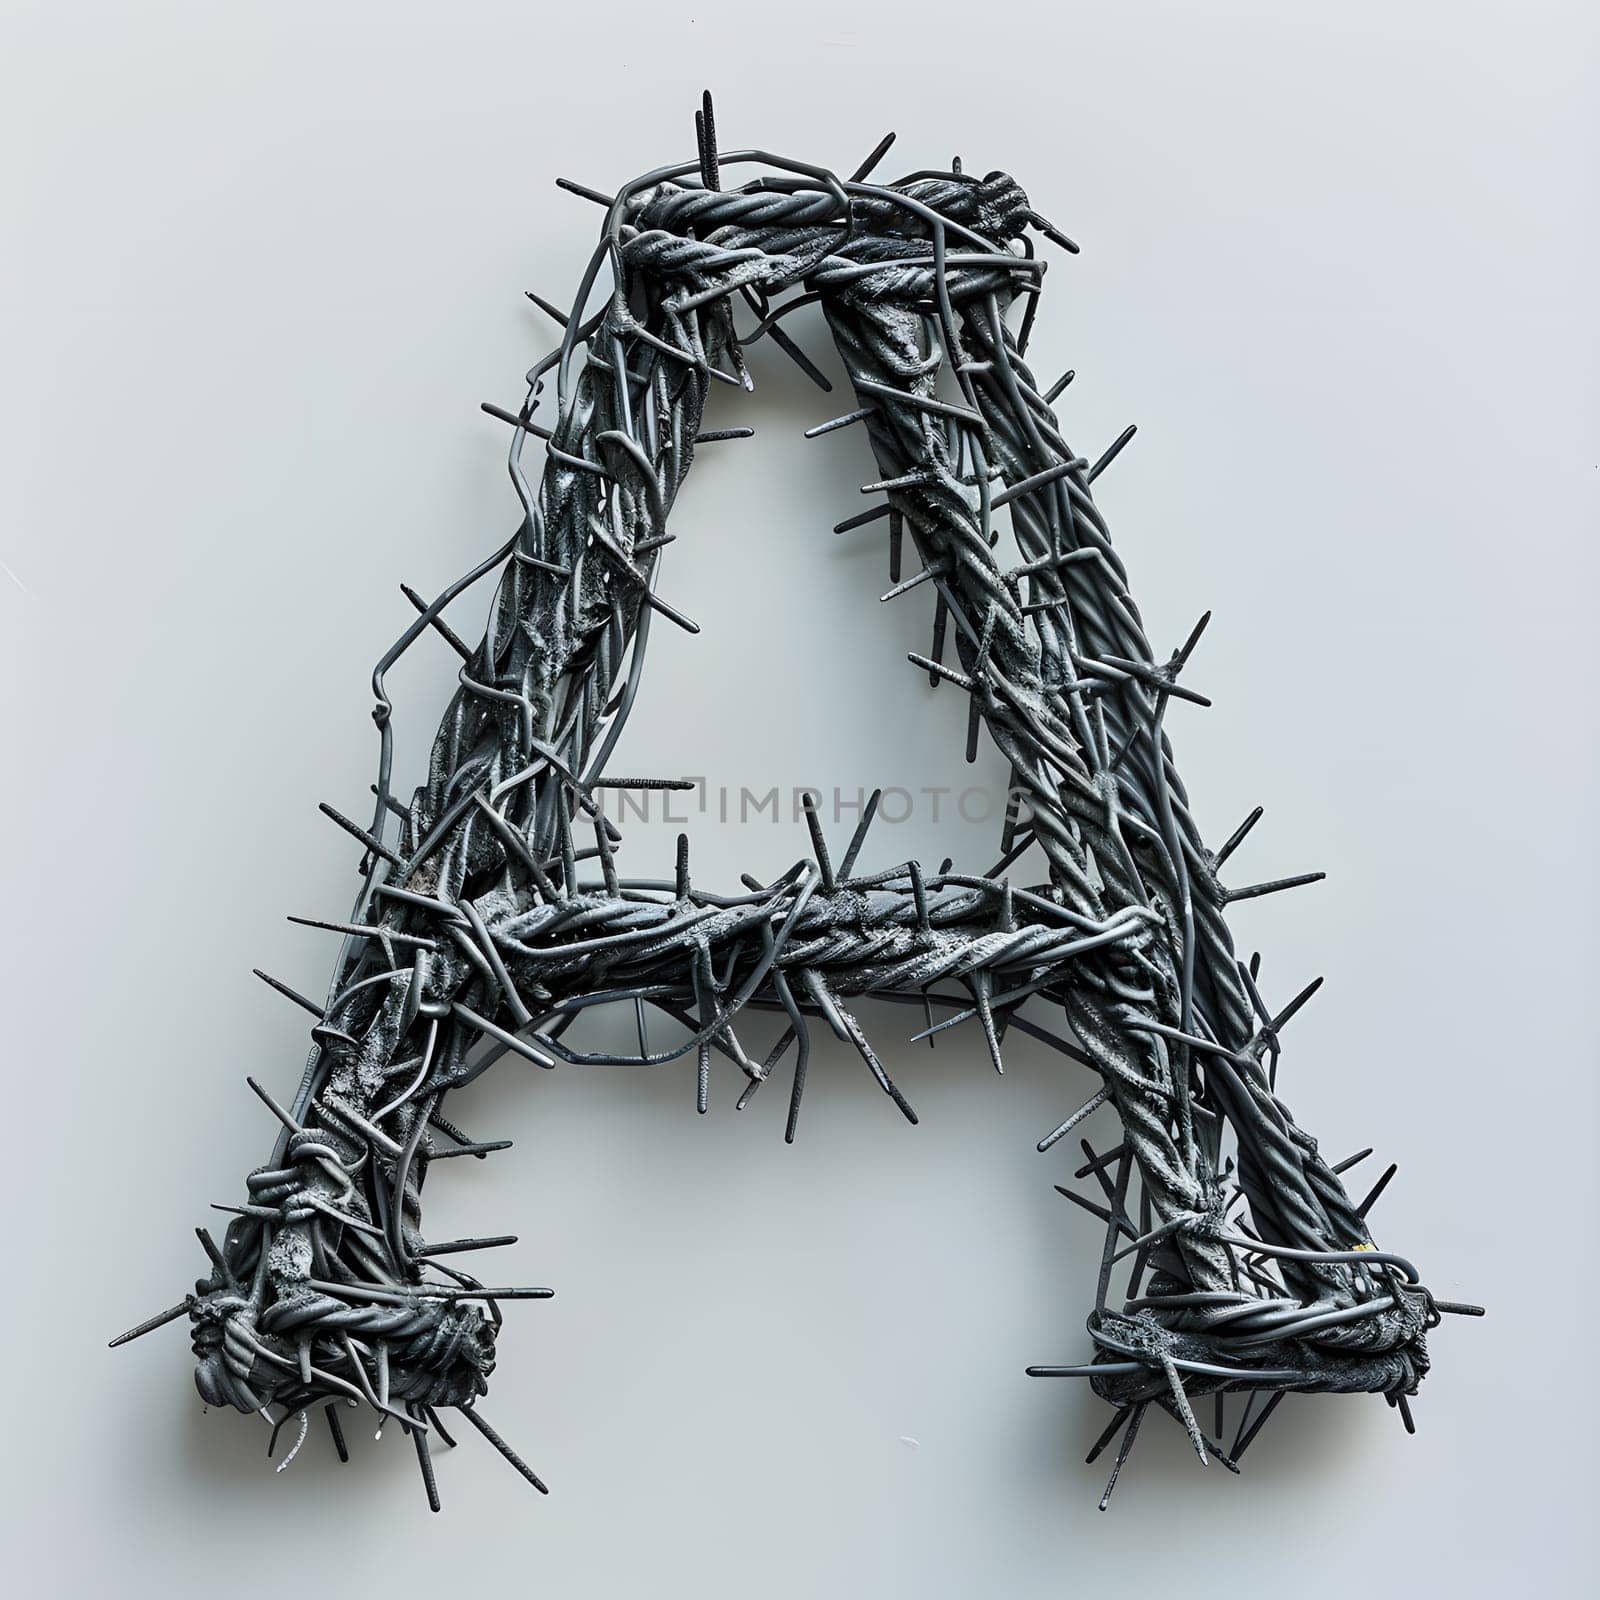 The letter A is crafted from twisted twigs, a natural material resembling barbed wire. It gives off a rustic look, perfect for a naturethemed event or fashion accessory